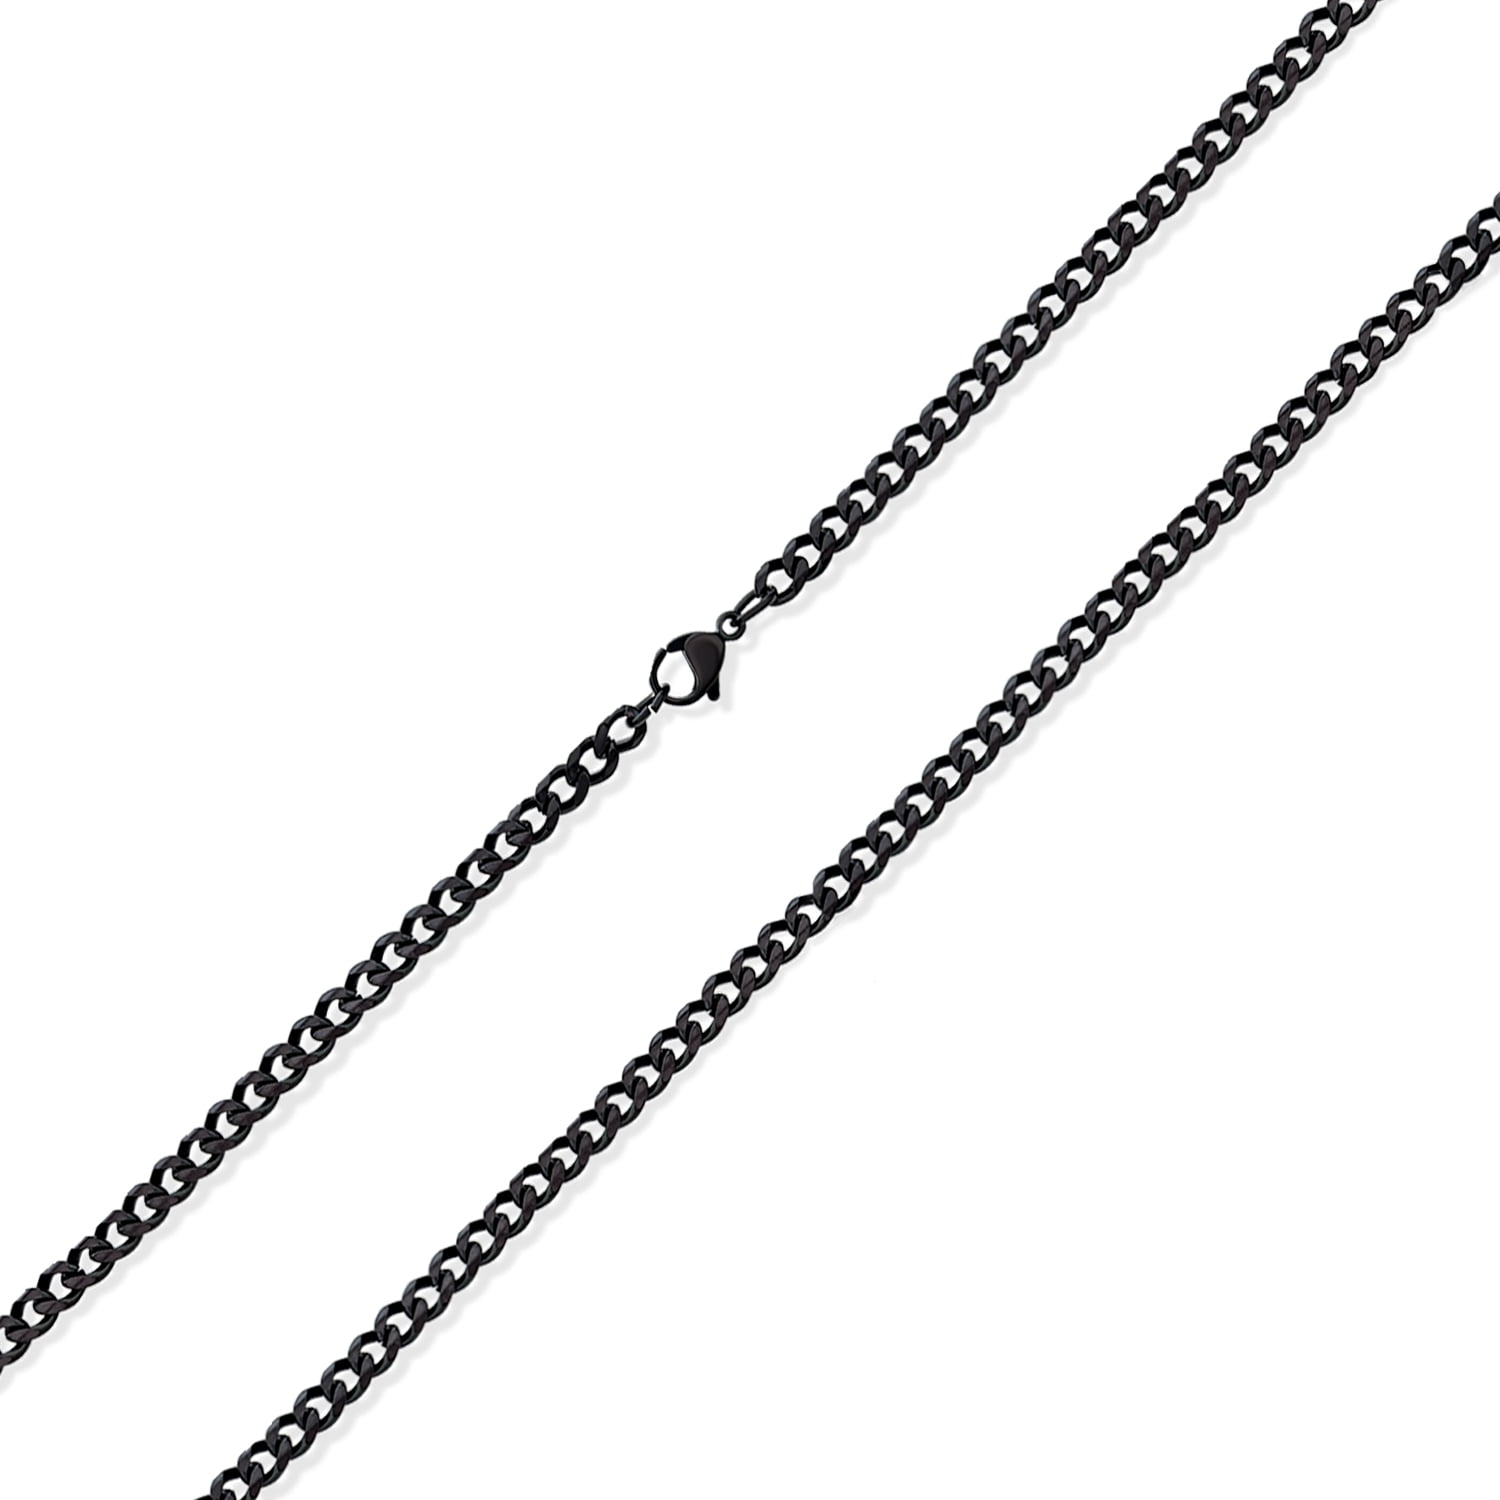 4.6-6.5 MM Wide, 16-36 Inches Long MOWOM Black Chain Necklace for Men Women Boy 316L Stainless Steel Water Resistent Big Thick Cuban Link Chains Plated & Brushed Finish Silver Color with Gift Box 